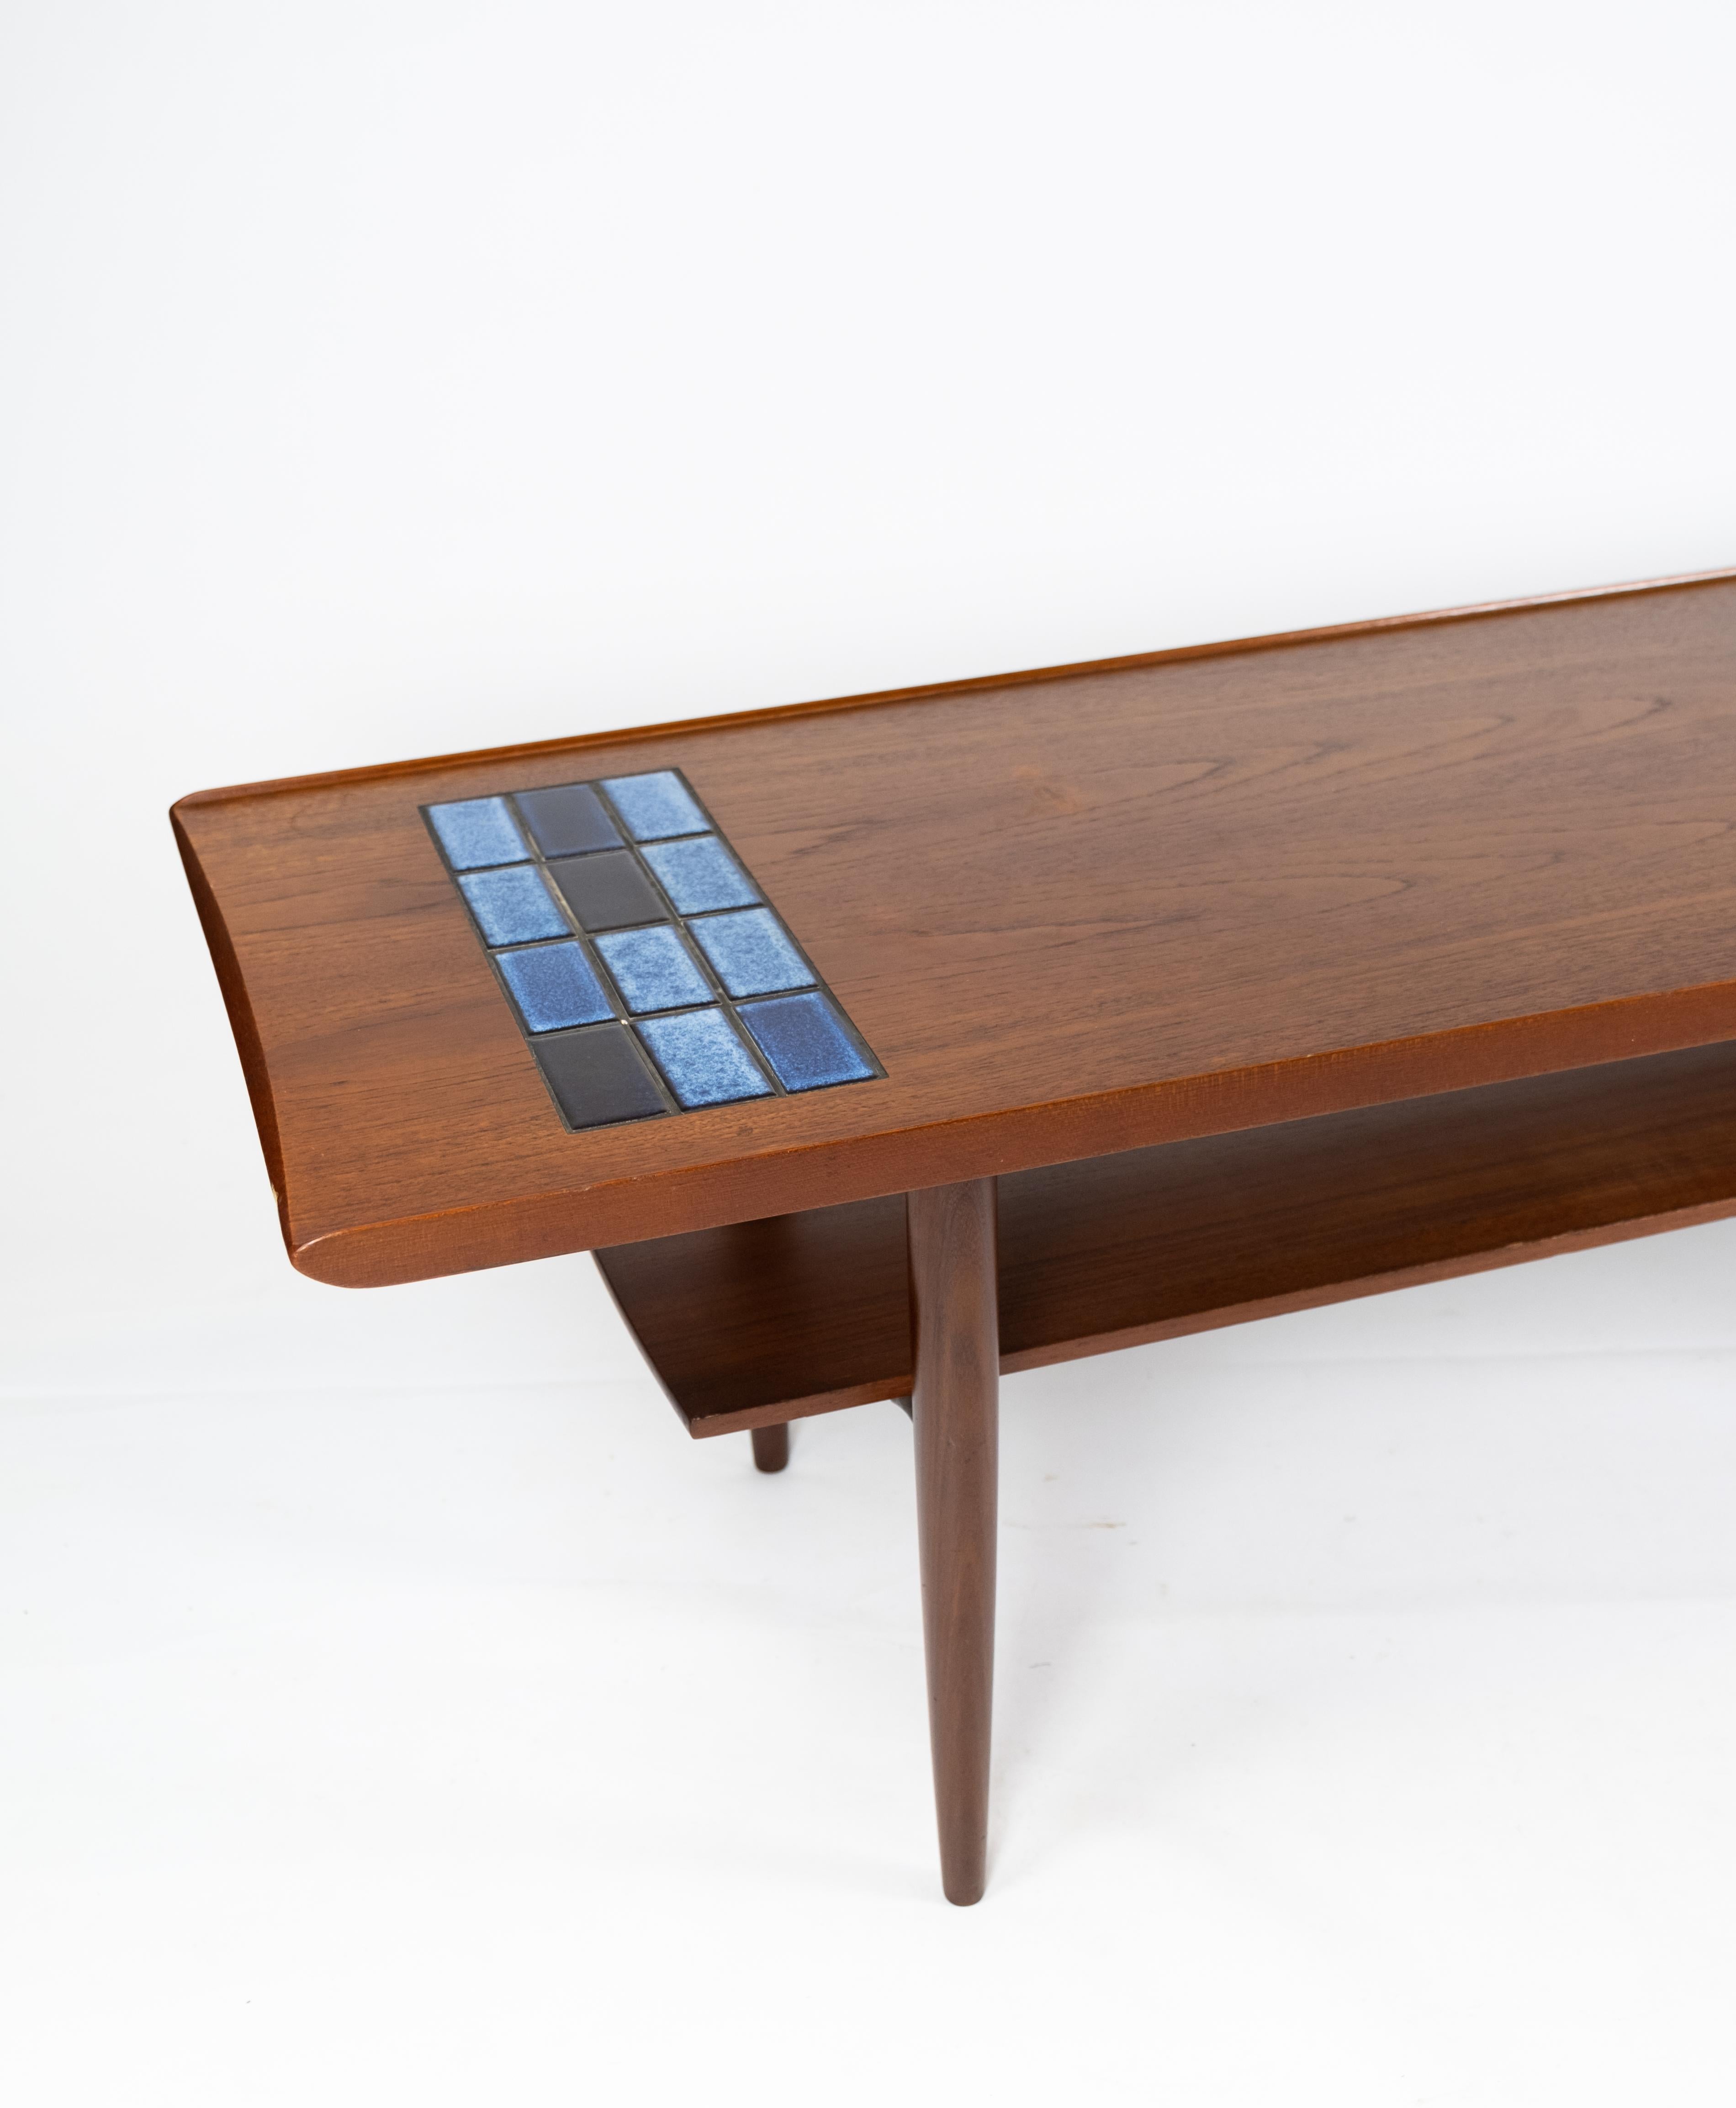 Scandinavian Modern Coffee Table in Teak with Blue Tiles of Danish Design from the 1960s